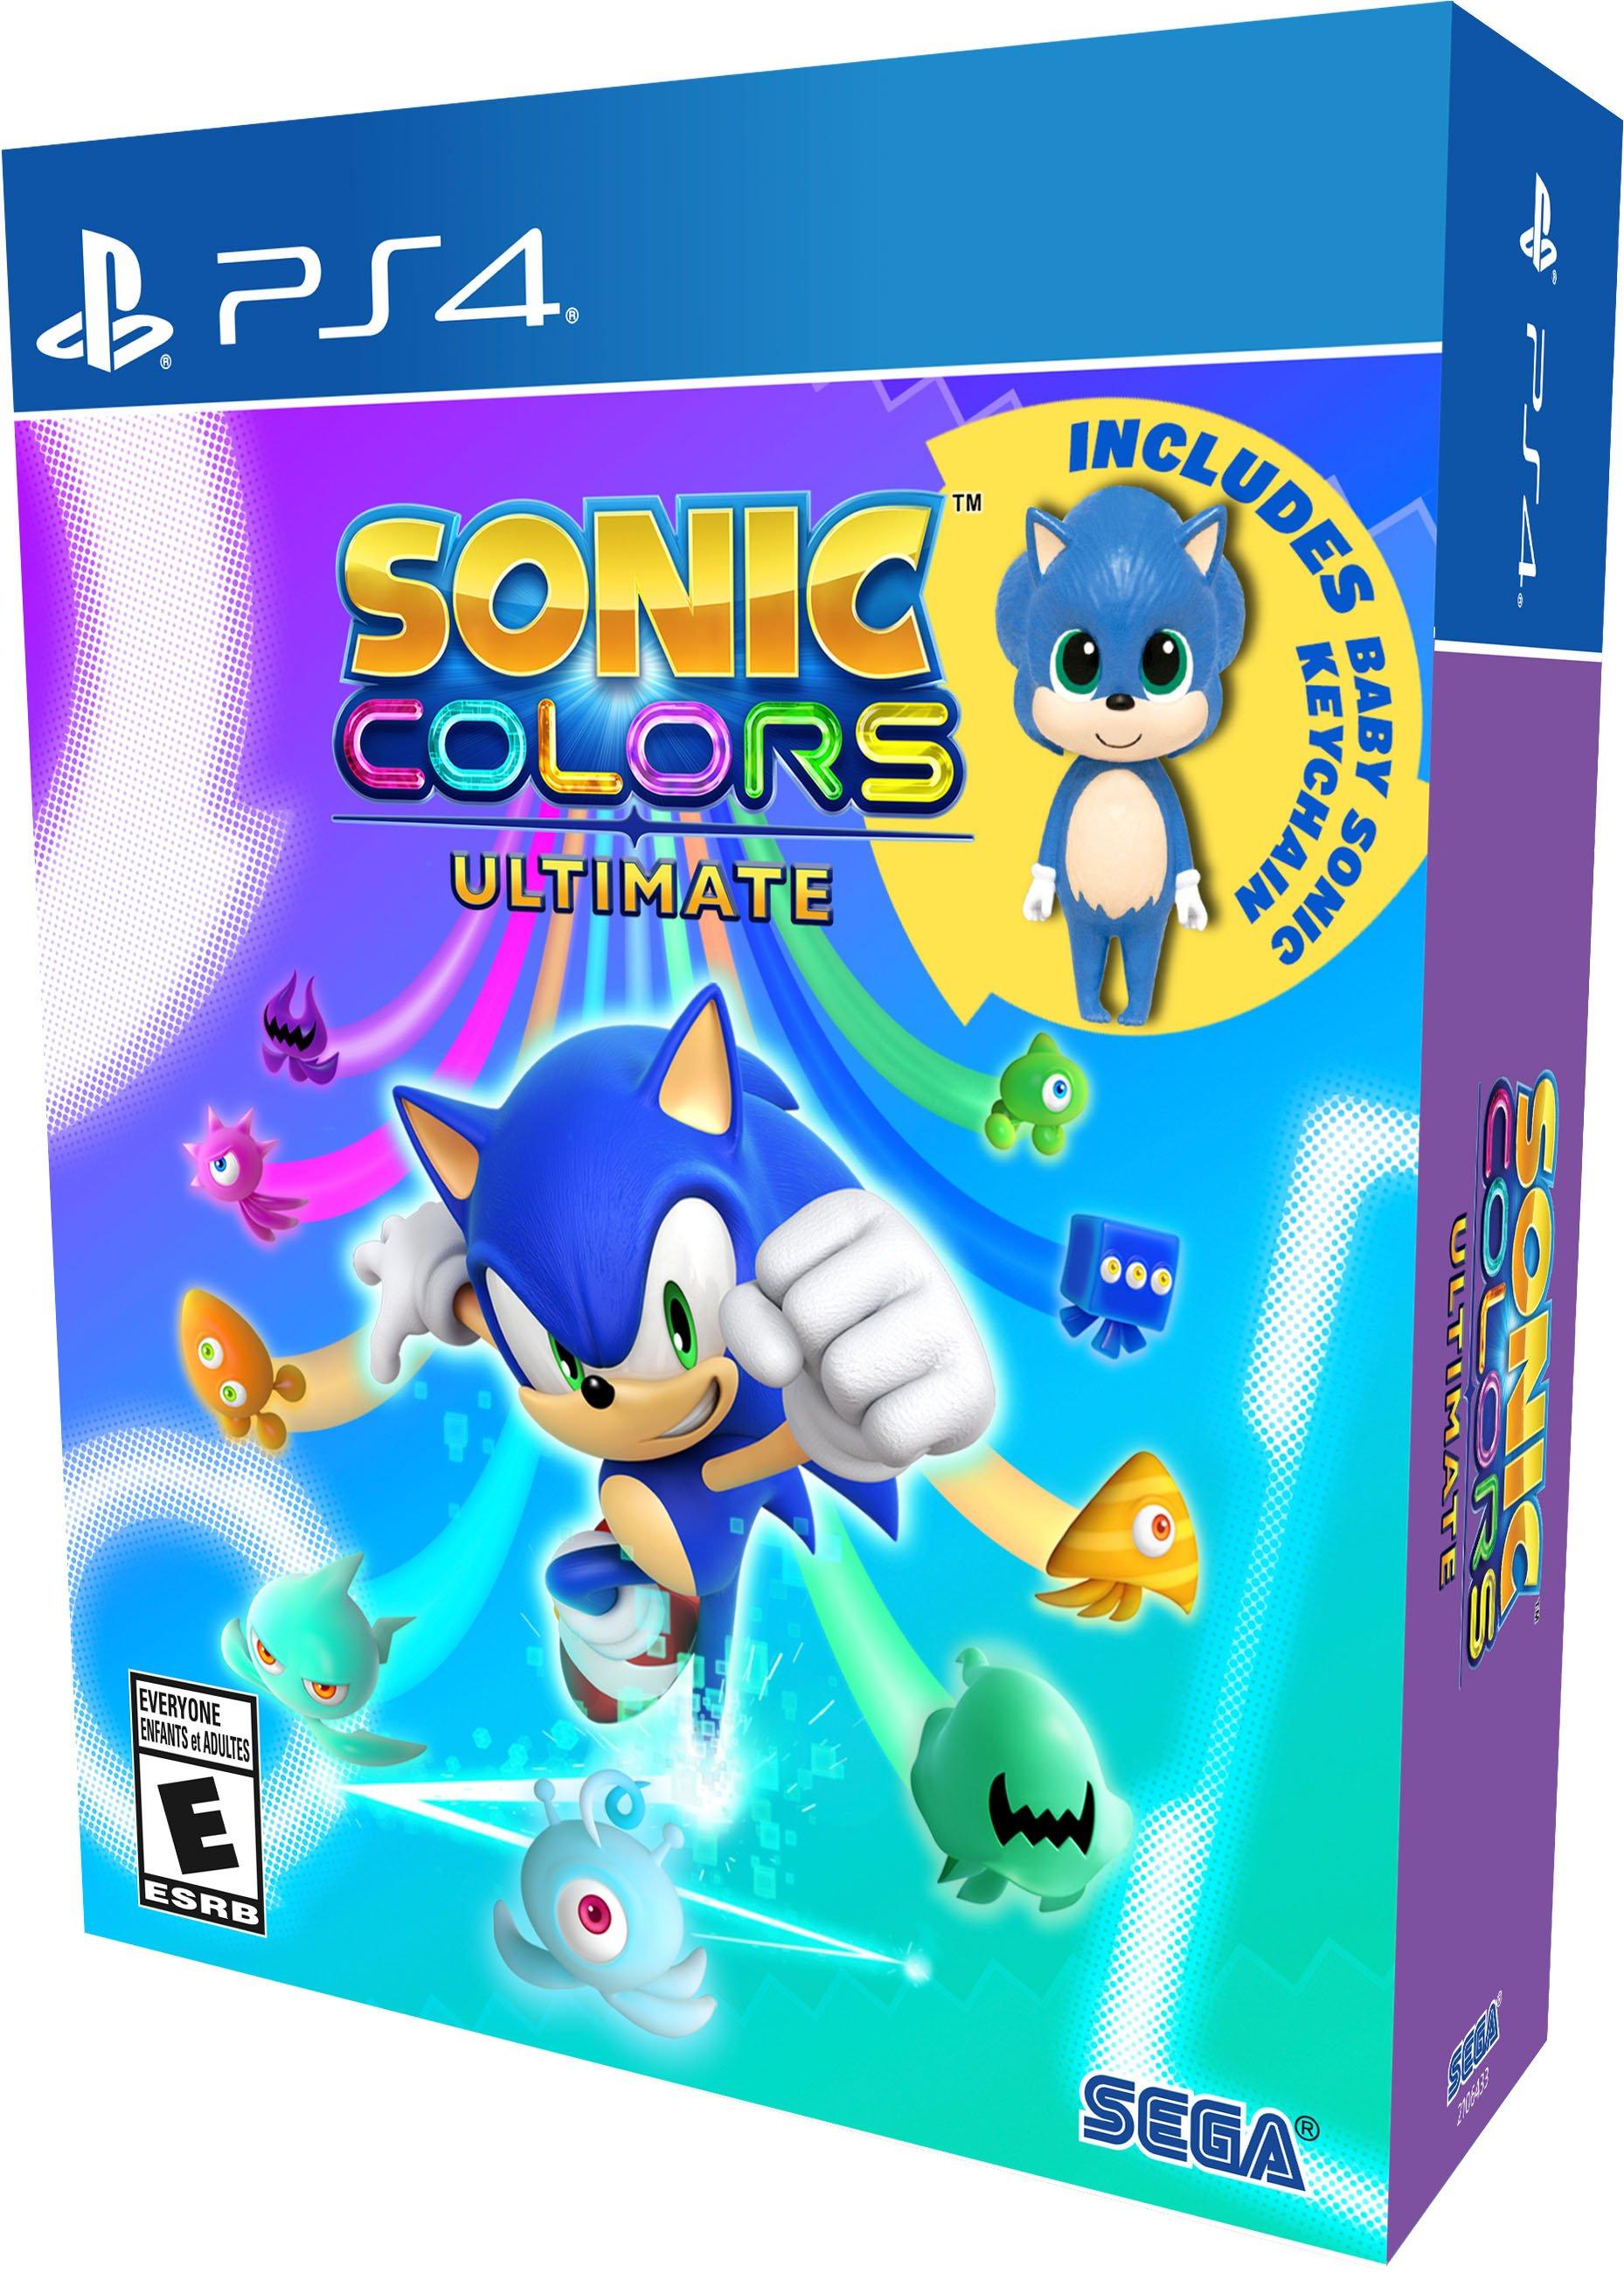 Sonic Colors - Play Game Online